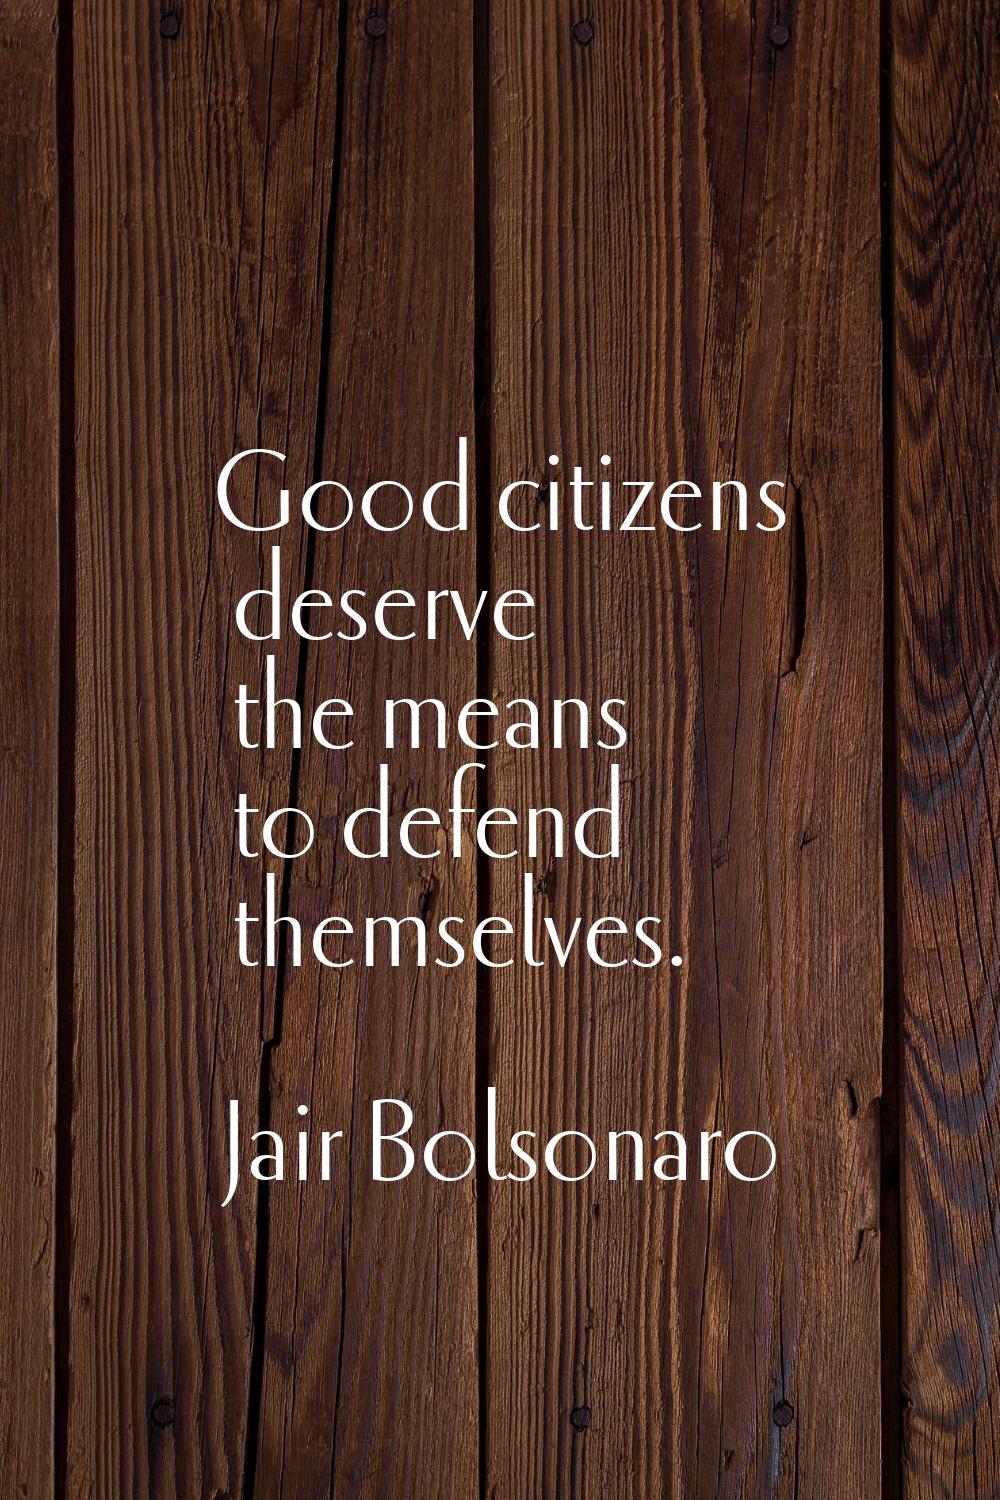 Good citizens deserve the means to defend themselves.